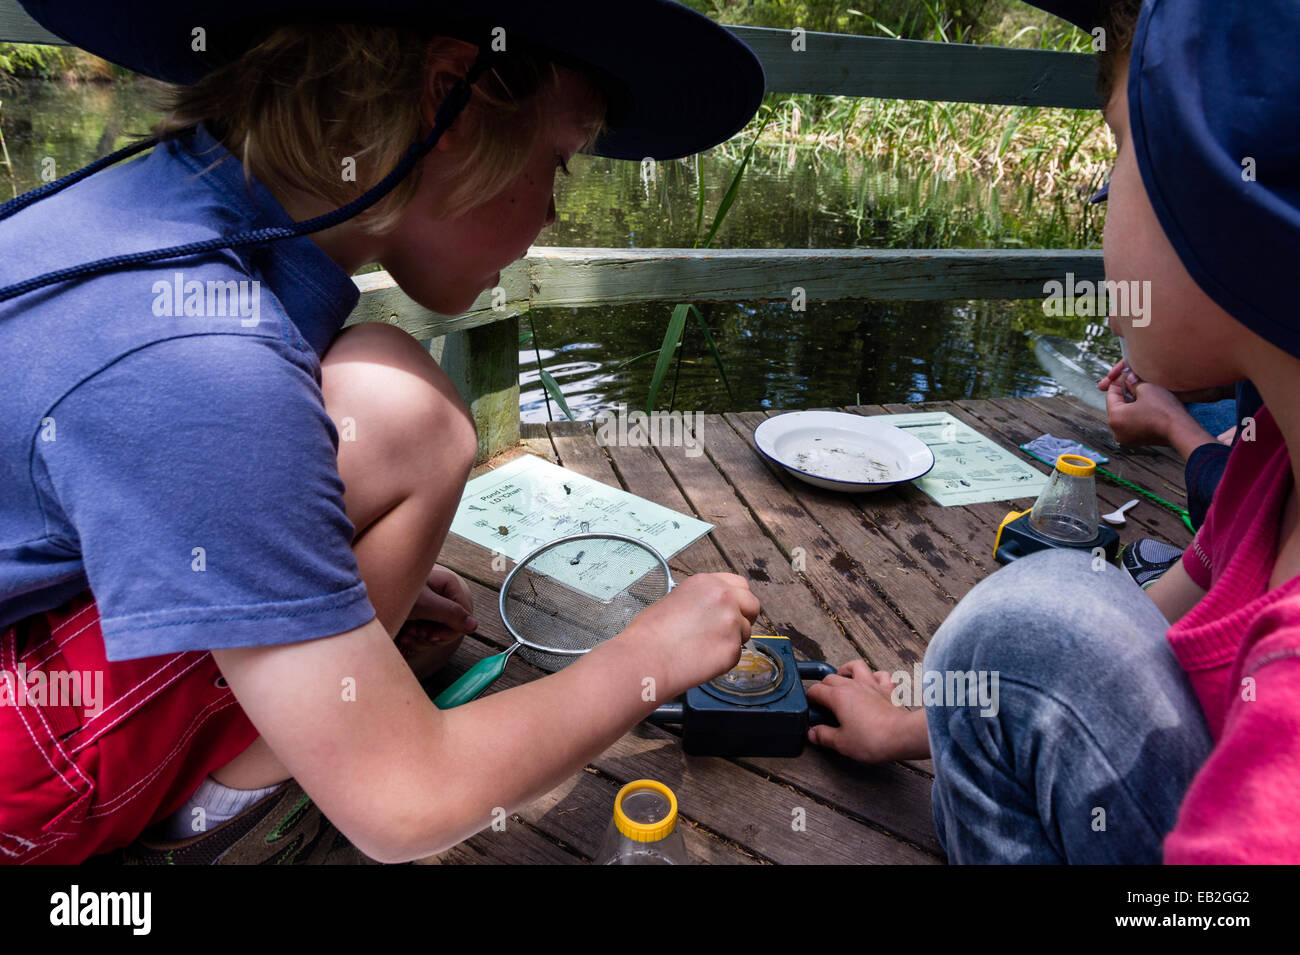 Small boys use a special magnifying glass to observe aquatic pond life on a school excursion. Stock Photo